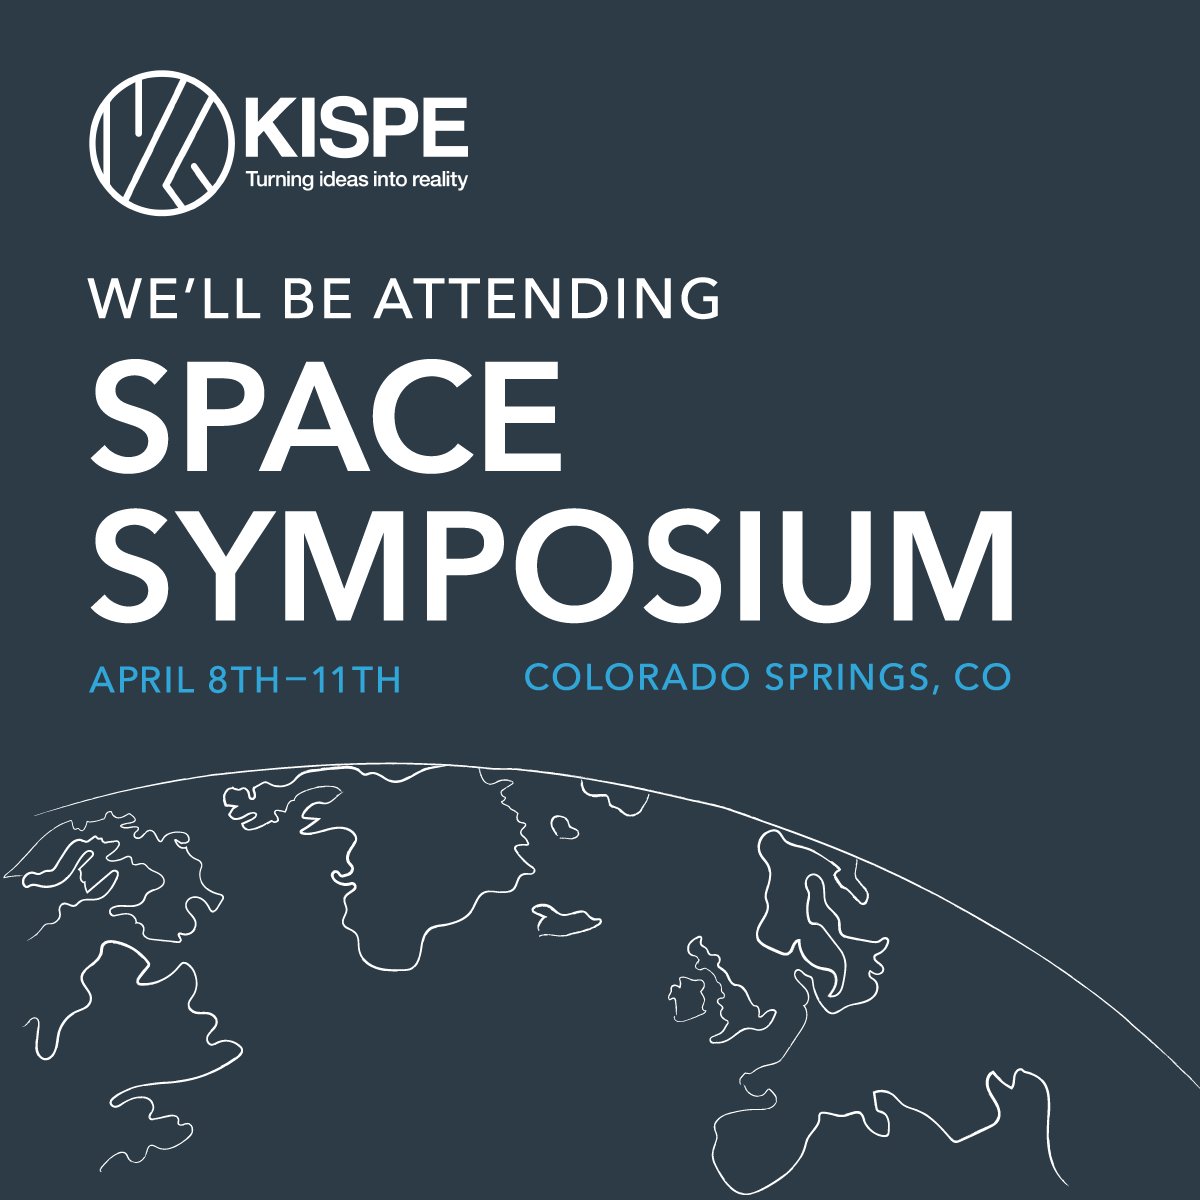 Next week our MD Dr John Paffett will be attending #SpaceSymposium, April 8th-11th in Colorado Springs. Over 10,000 Space Professionals and Decision Makers attend every year - see you there! 💫 @SpaceFoundation